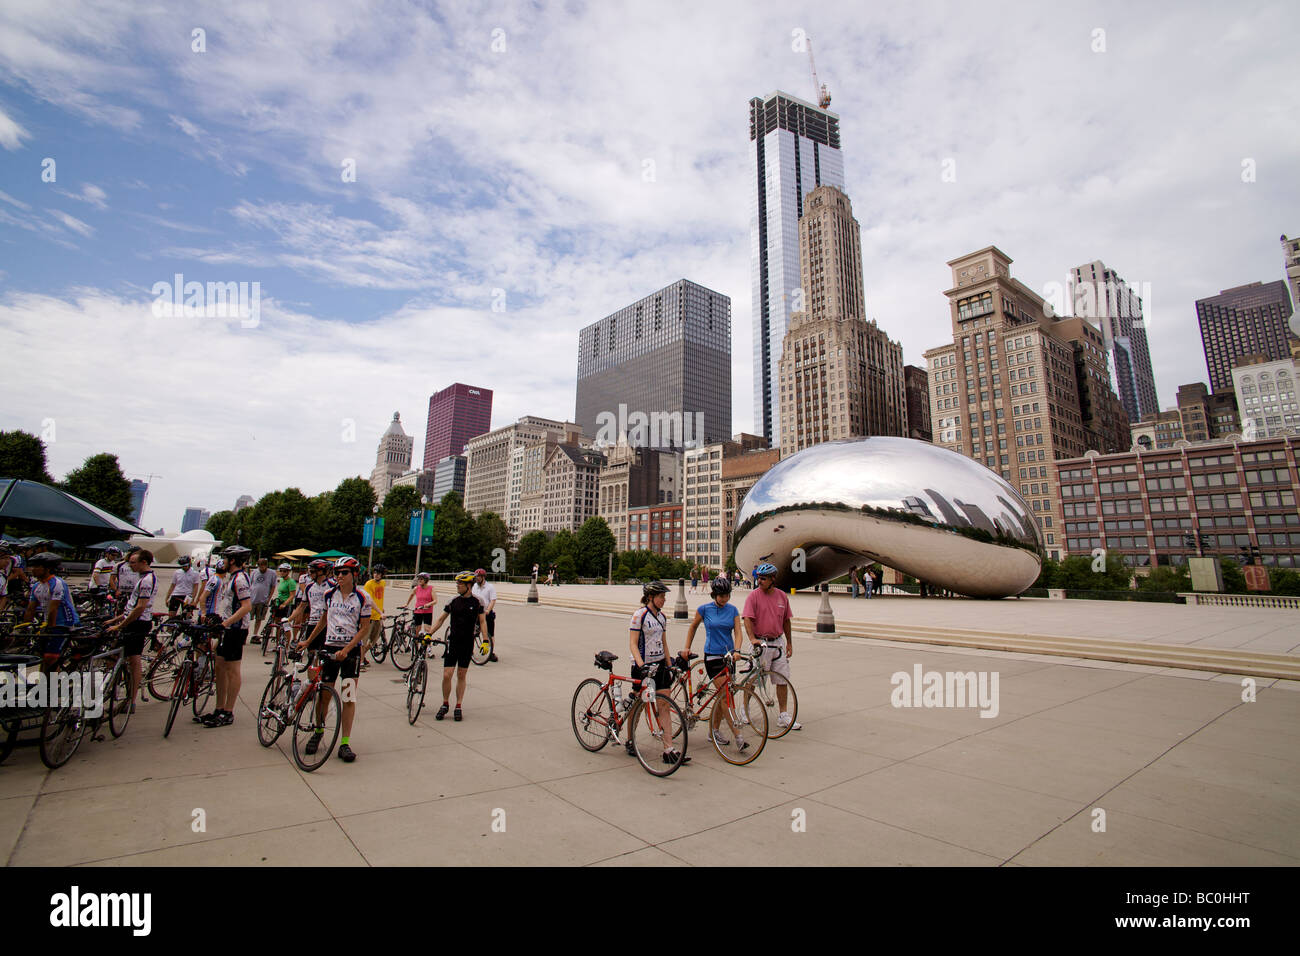 Bicyclists in Millennium Park Chicago Illinois with Anish Kapoor's Cloud Gate Sculpture also known as The Bean. Stock Photo